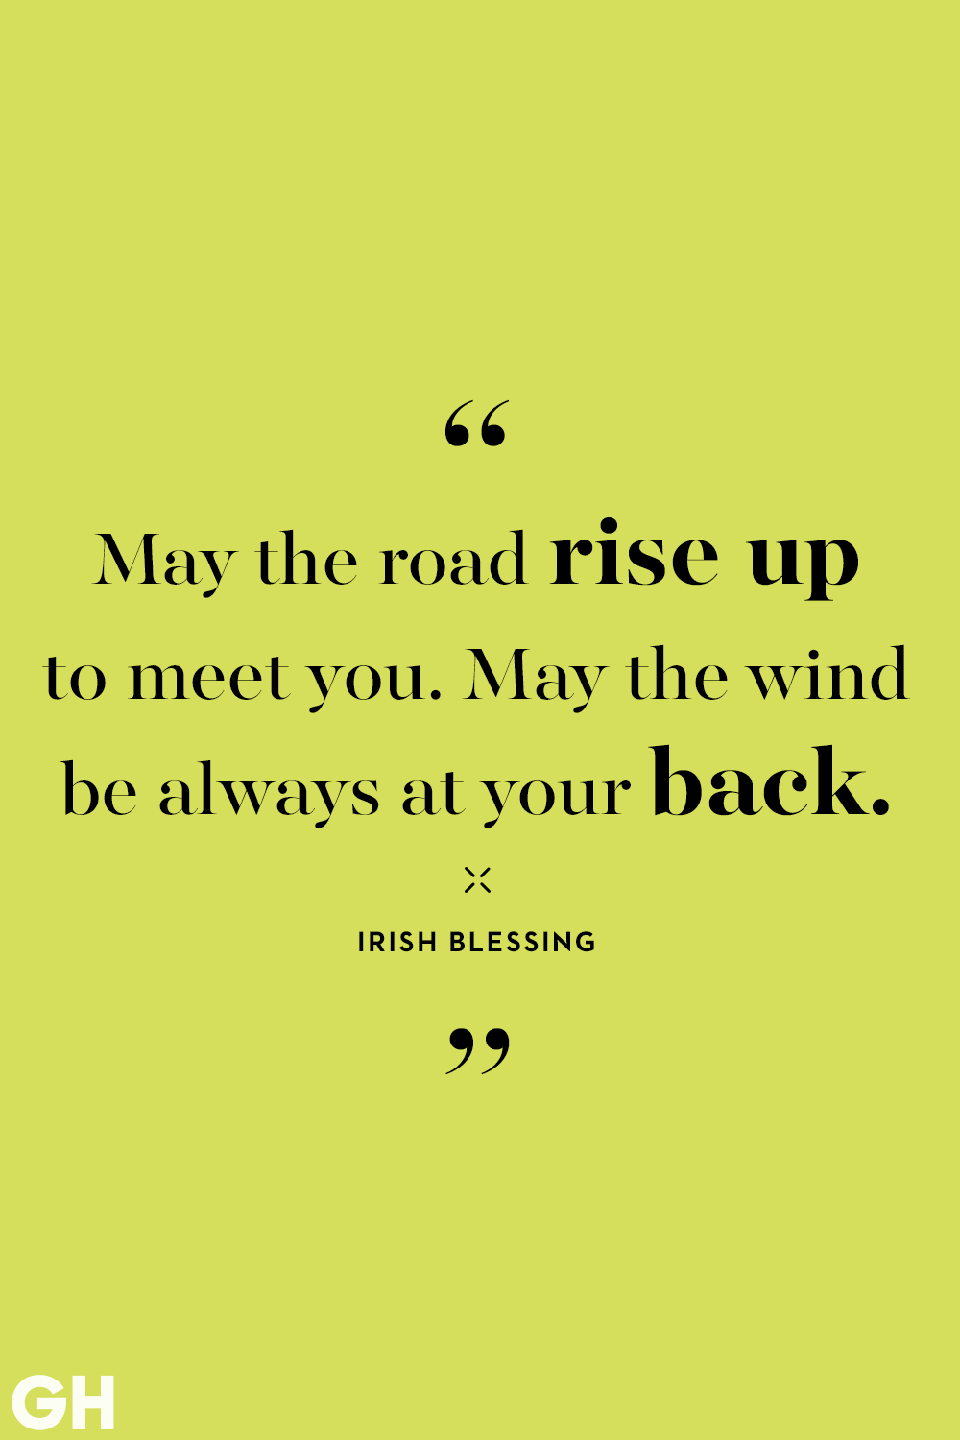 <p>May the road rise up to meet you. May the wind be always at your back. </p>